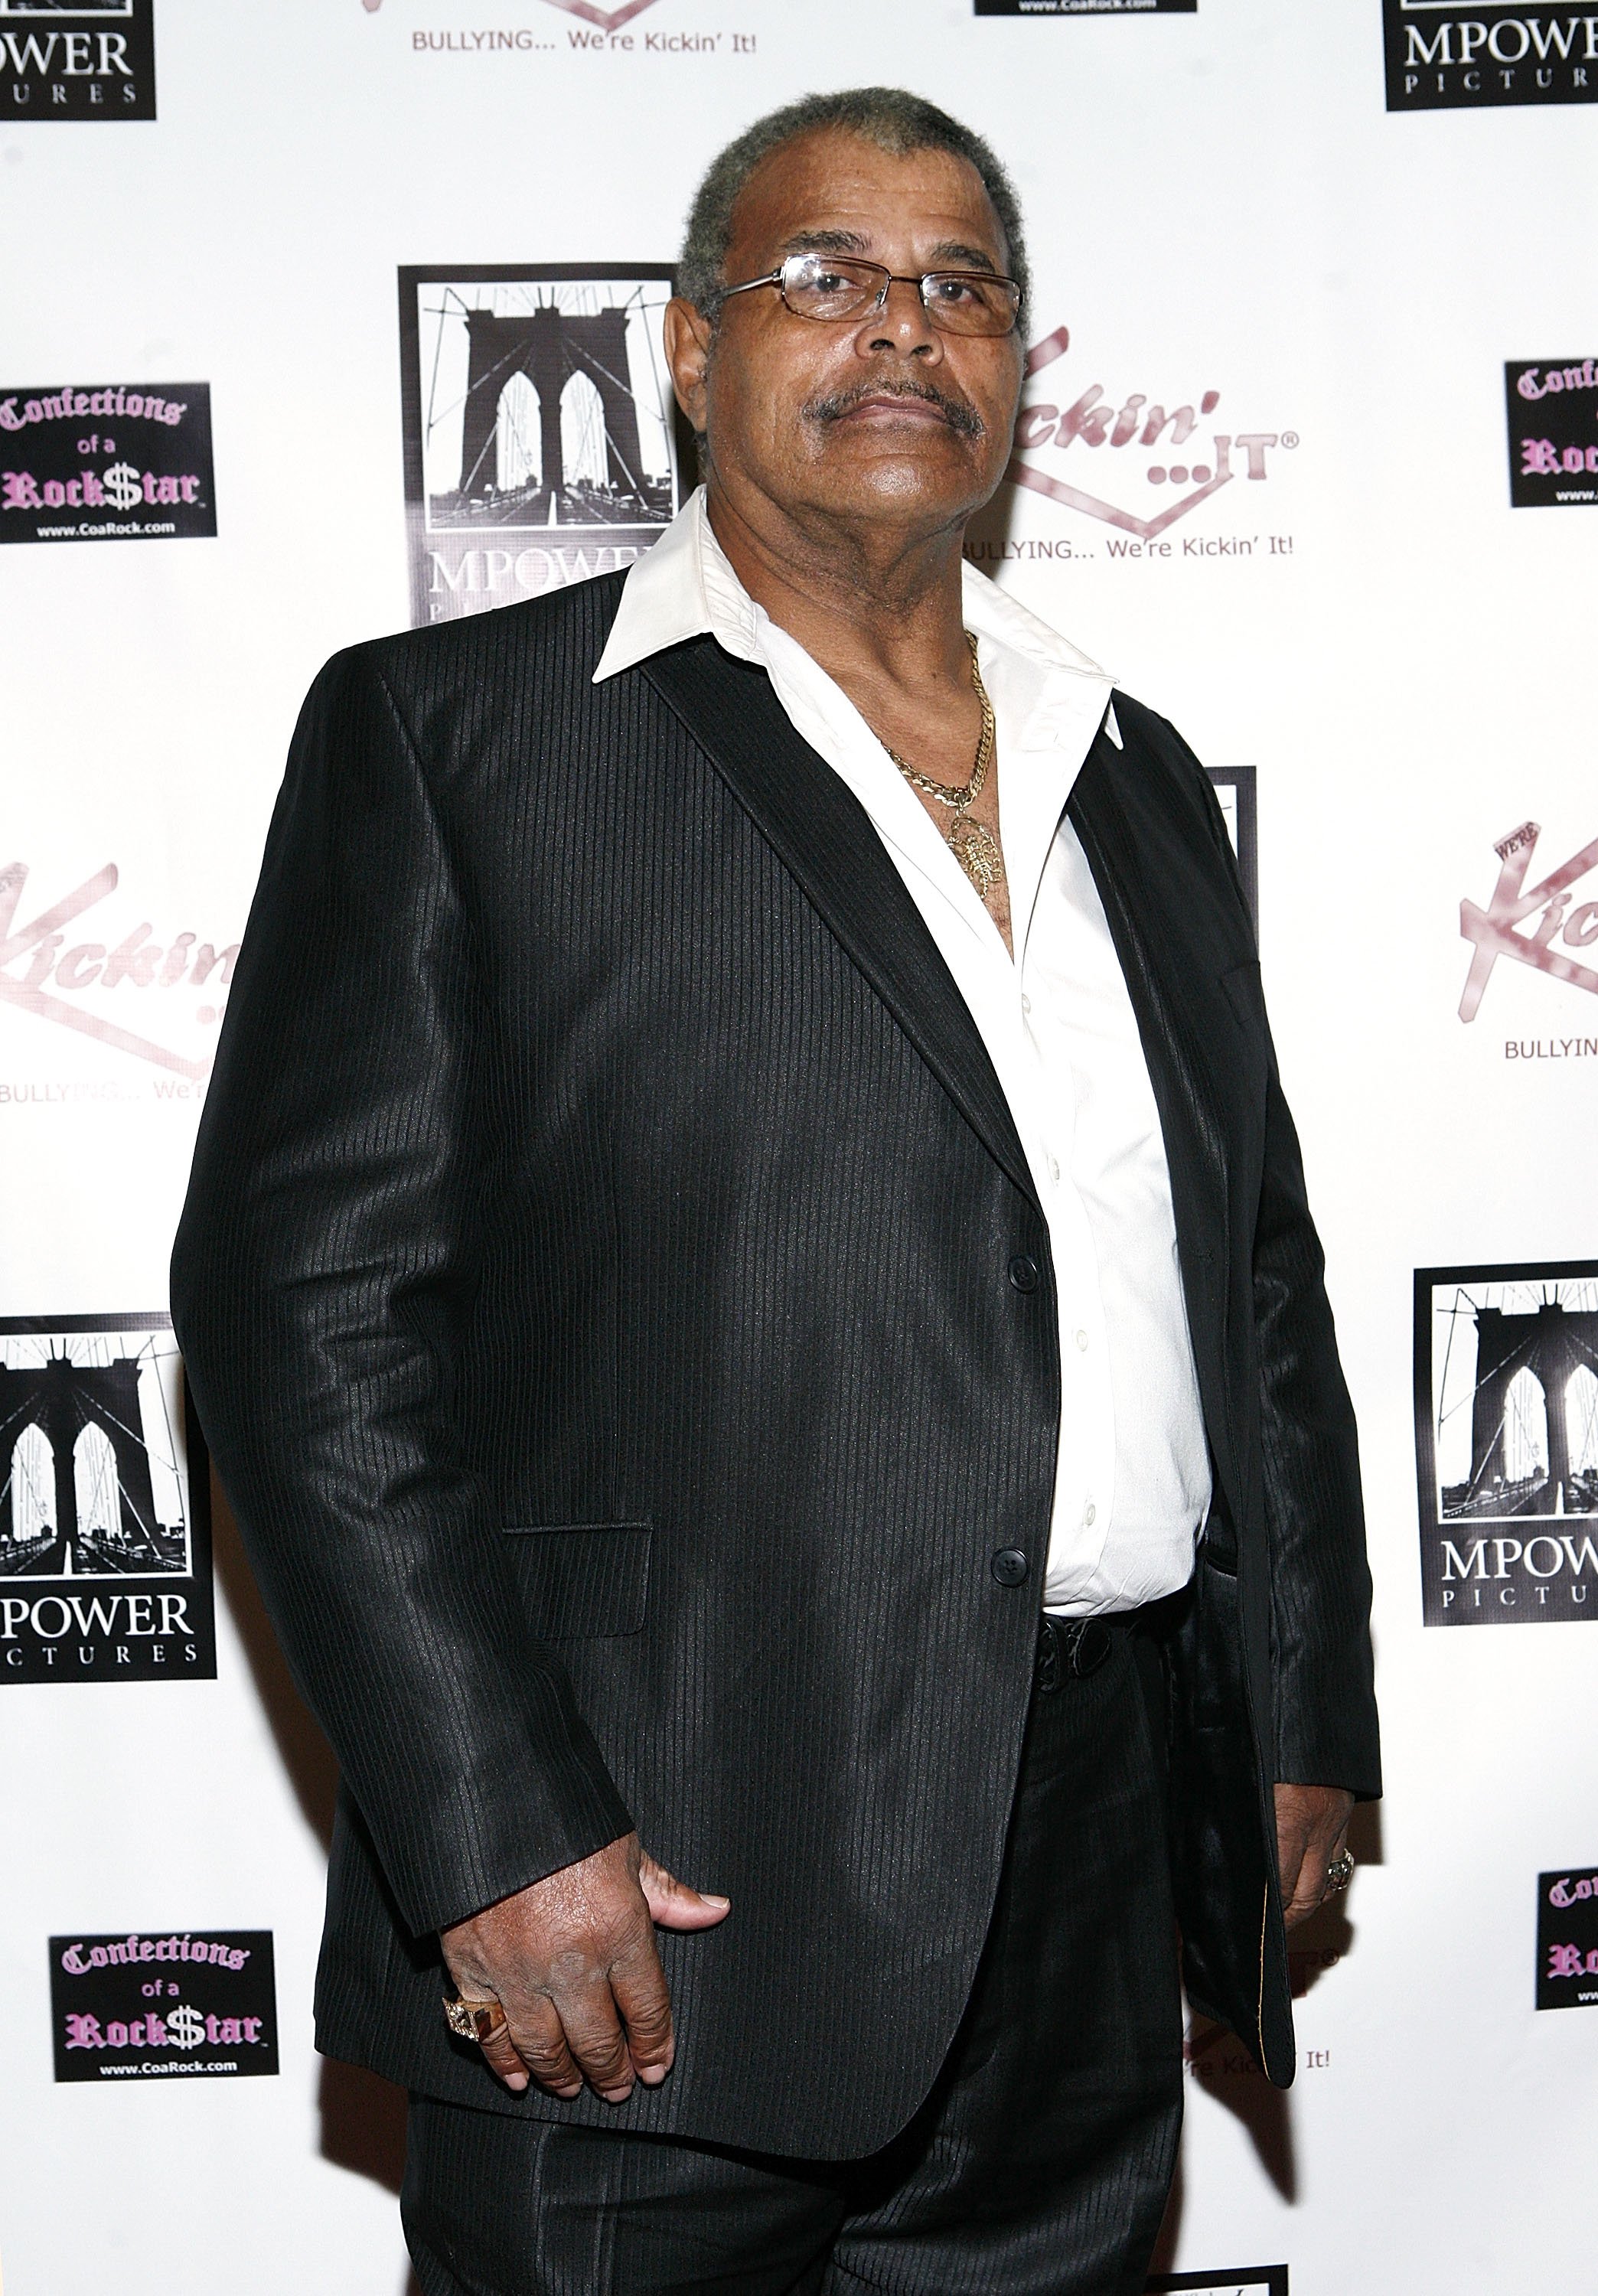  Rocky Johnson attending "Unite in the Fight...To Knock out Bullying" at the Hard Rock Cafe New York in October 2011 | Photo: Getty Images